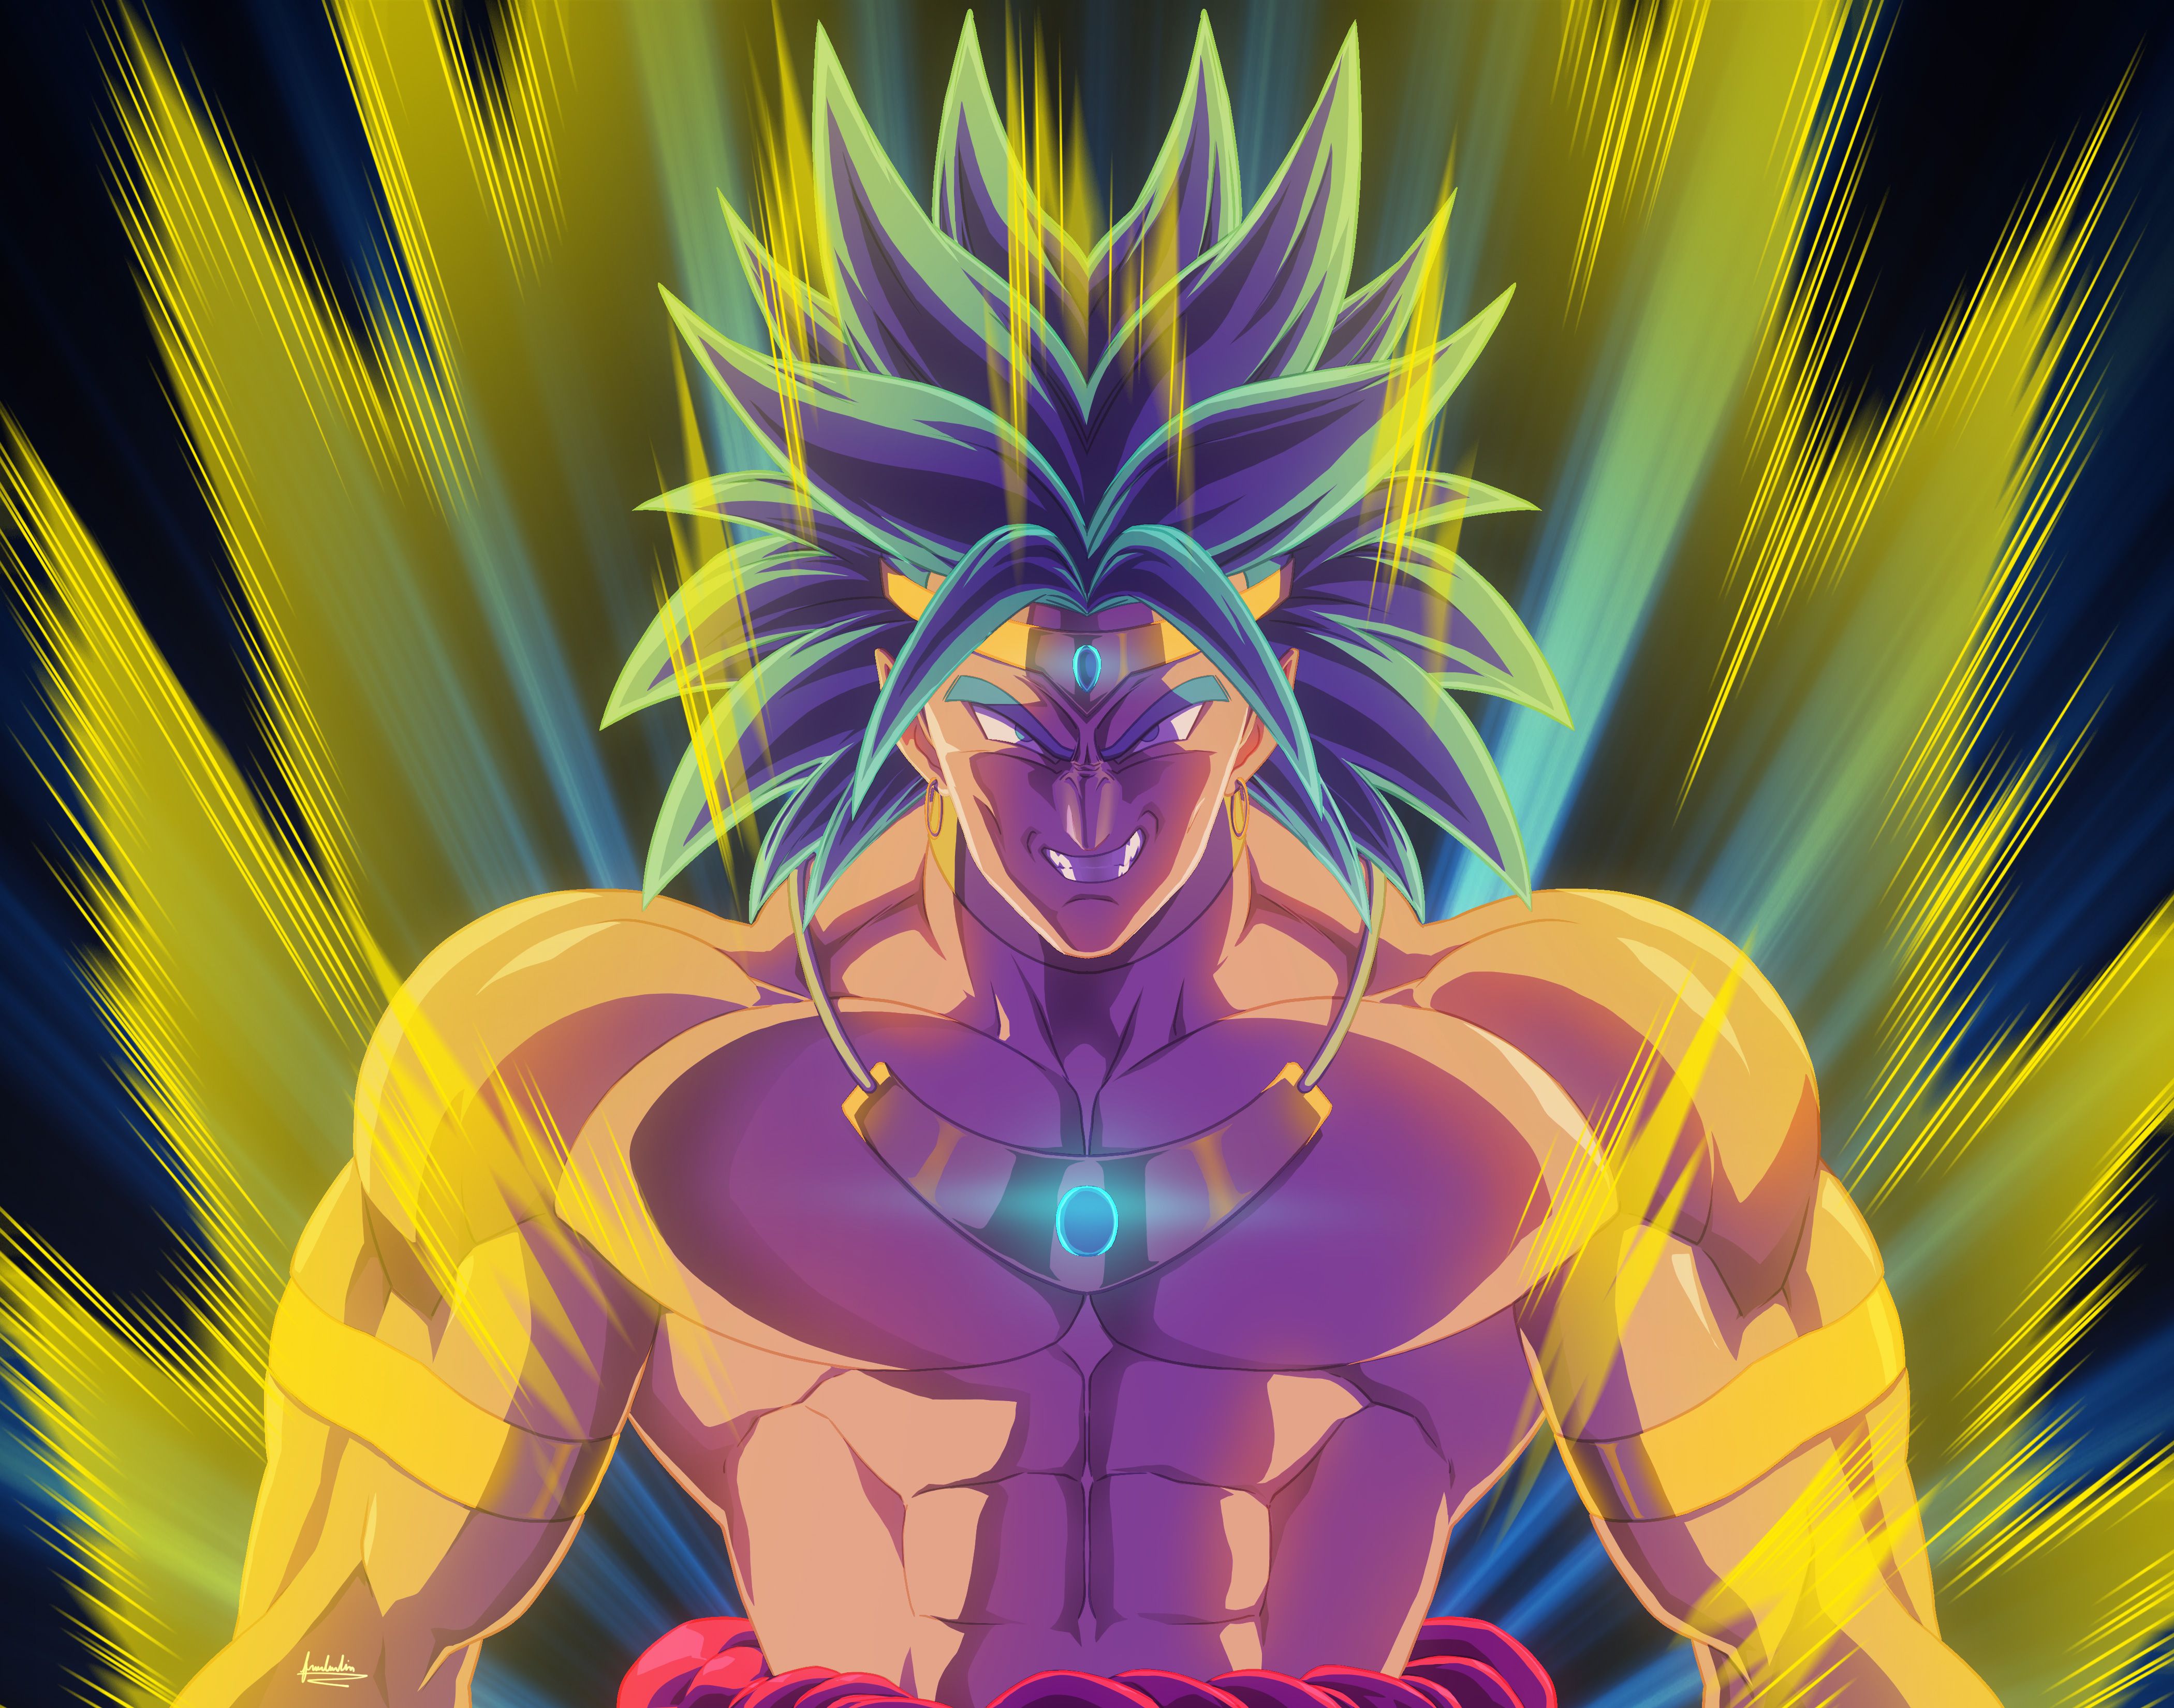 Broly Dragon Ball Z Anime Artwork, HD Anime, 4k Wallpaper, Image, Background, Photo and Picture